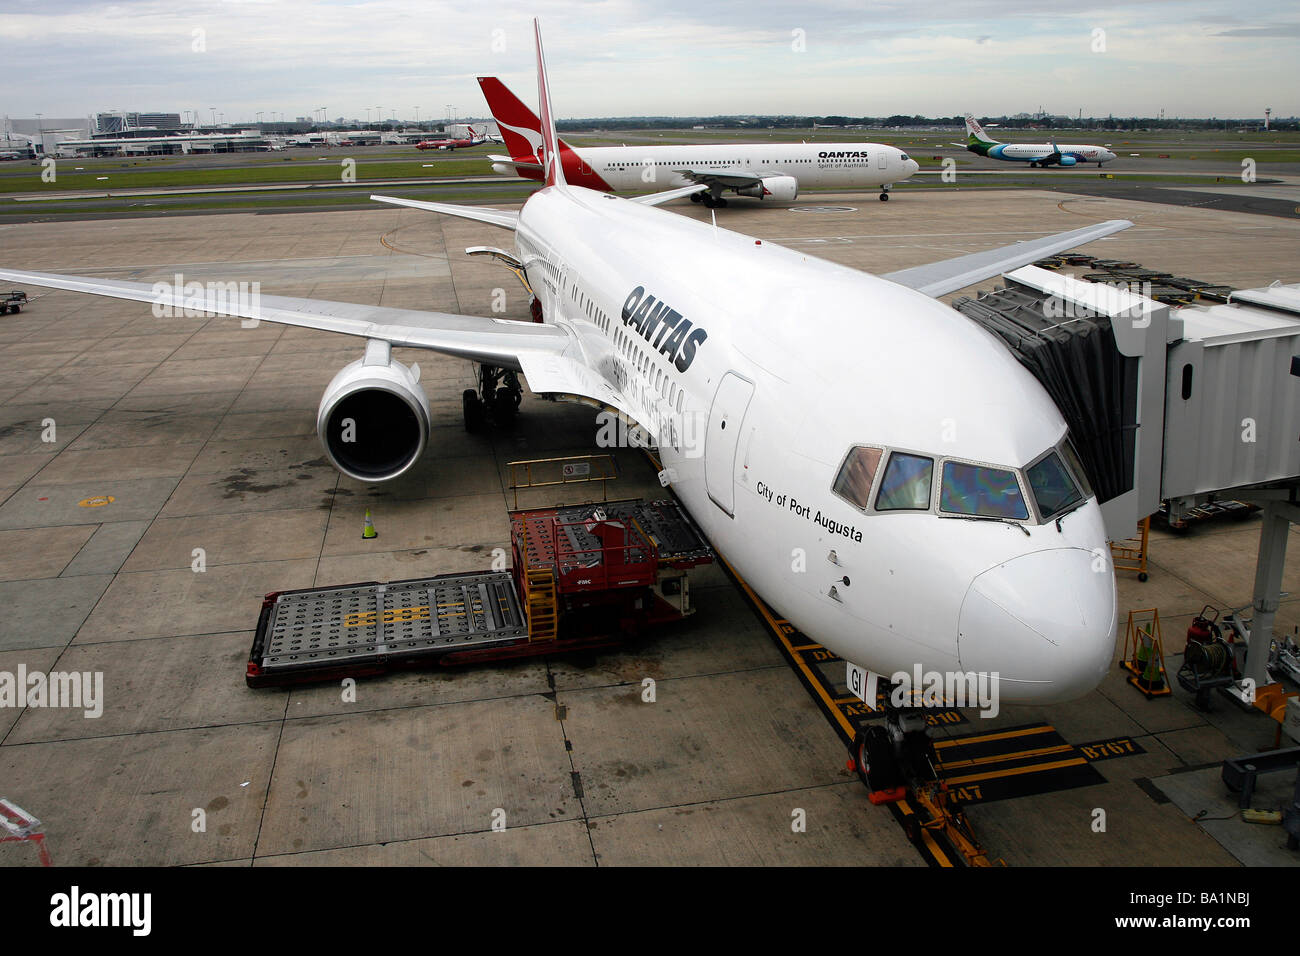 A Qantas Boeing 767-338ER aircraft sits on the tarmac at Sydney Kingsford Smith International Airport Stock Photo